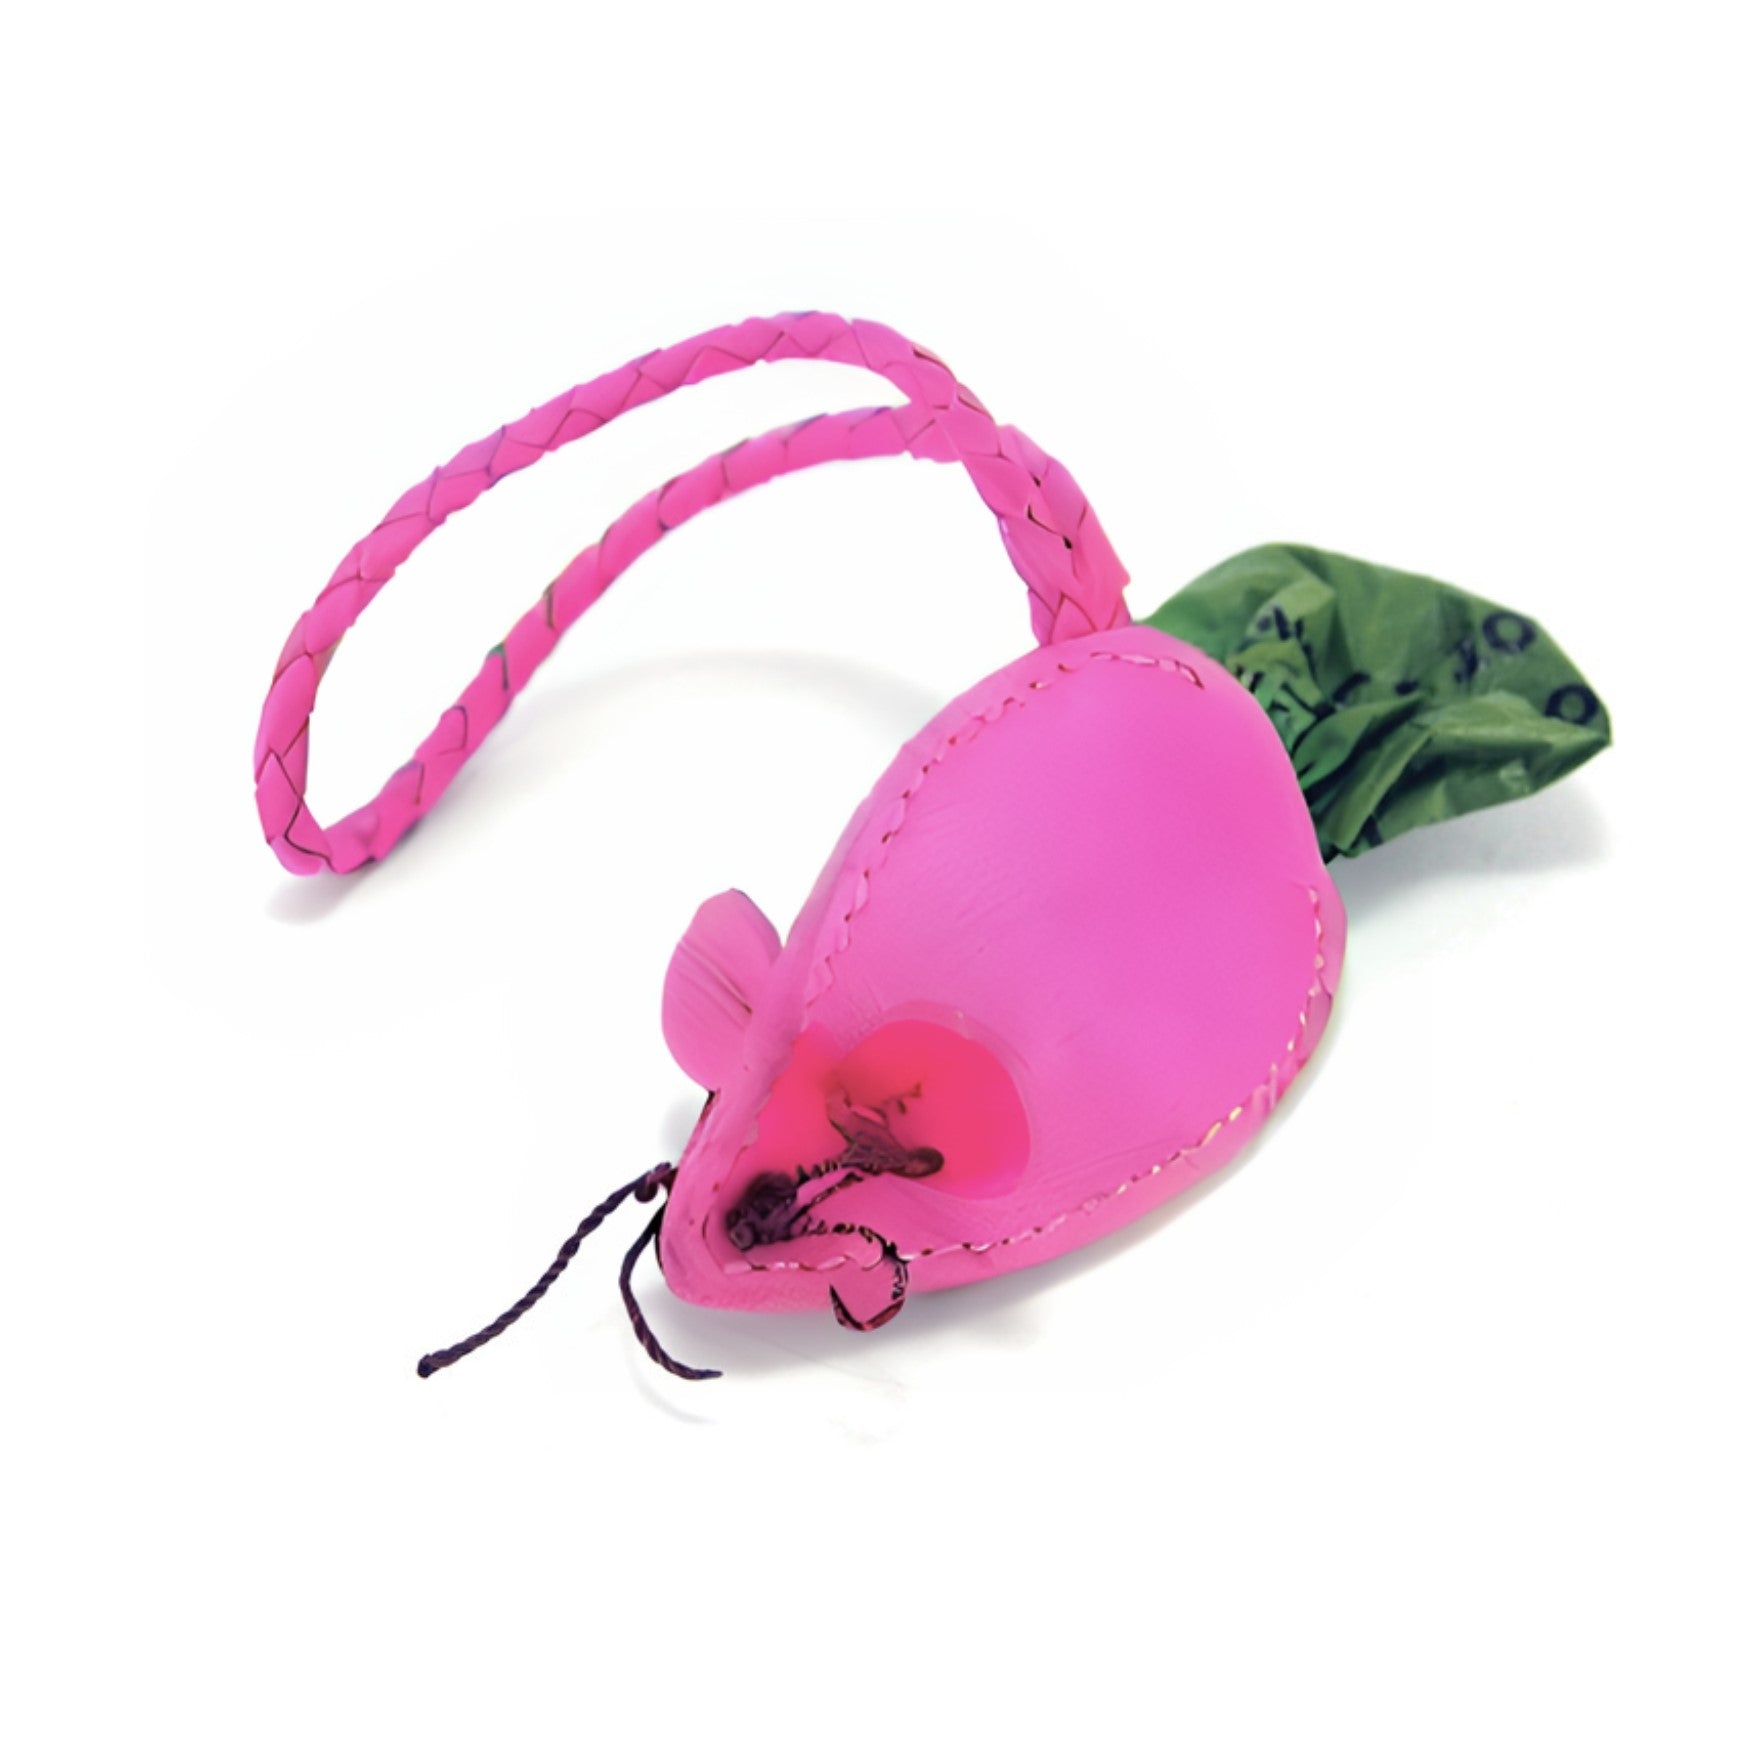 A bright pink, artificial leather Georgie Paws Mouse Poobag Dispenser with a green leafy top and wrist strap, featuring intricate stitching and a compostable drawstring closure.